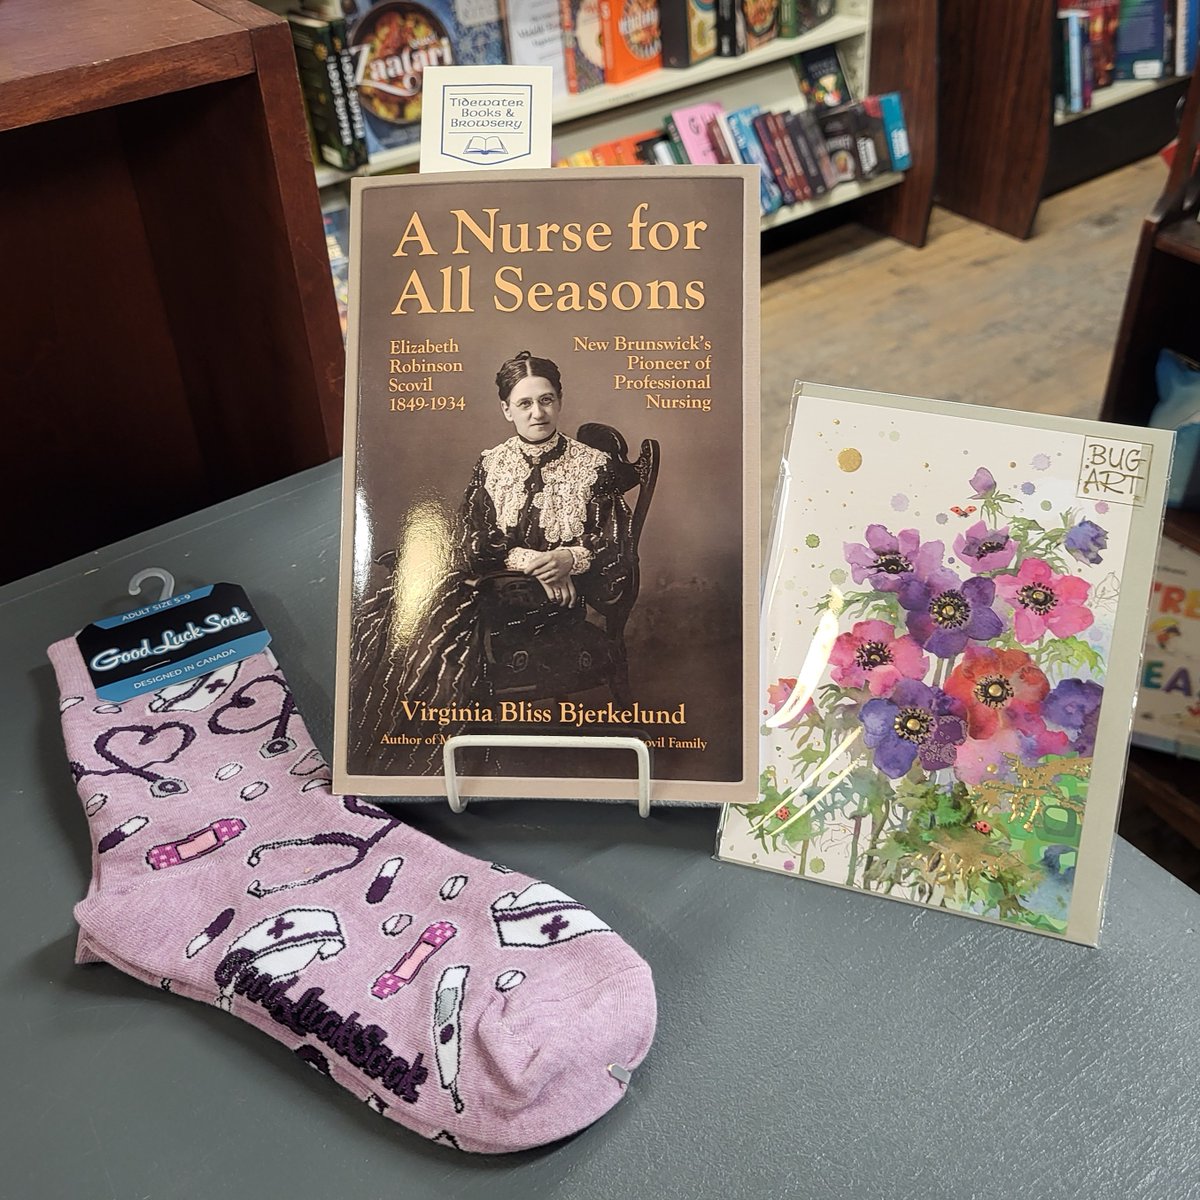 Today's #MaritmeMonday & #NurseDay Featured #NBLit in-store is A Nurse for All Seasons by #NSWriter Virginia Bliss Bjerkelund. Pictured with fun #GoodLuckSocks & a colourful #BugArt card. Show your favourite health care worker some love today with books & beauty!💕🇨🇦📚🧑‍⚕️⚕️❤️‍🩹🧦